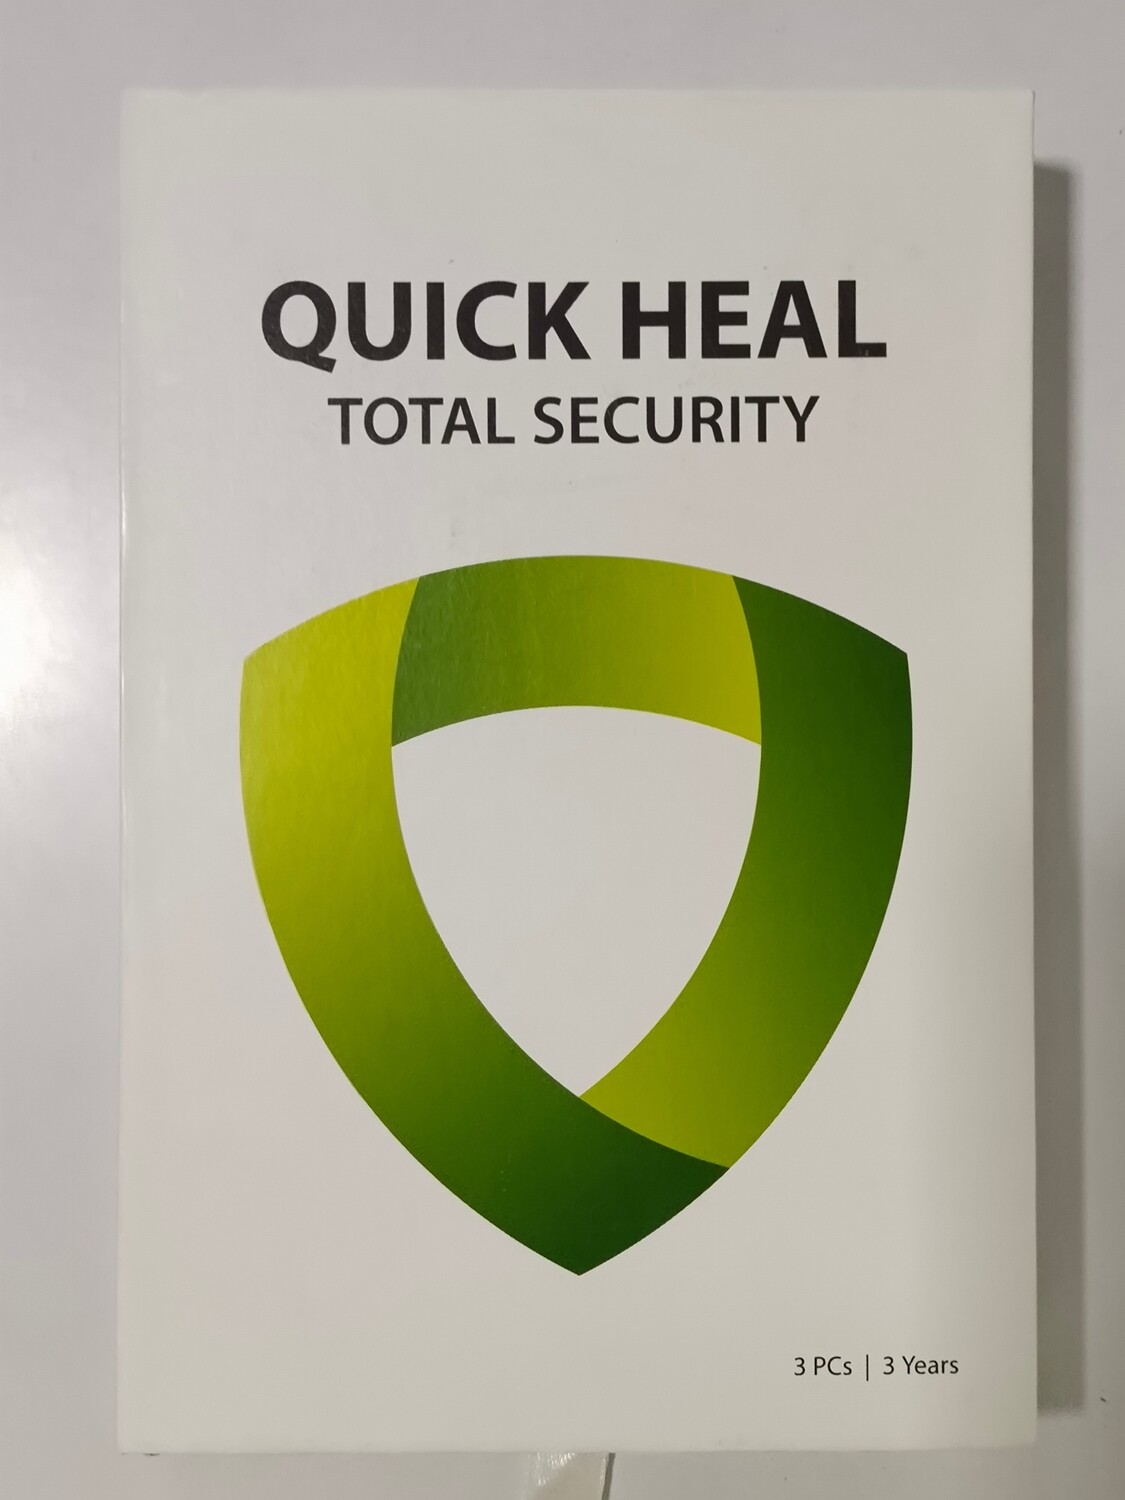 New, 3 User, 3 Year, Quick Heal Total Security